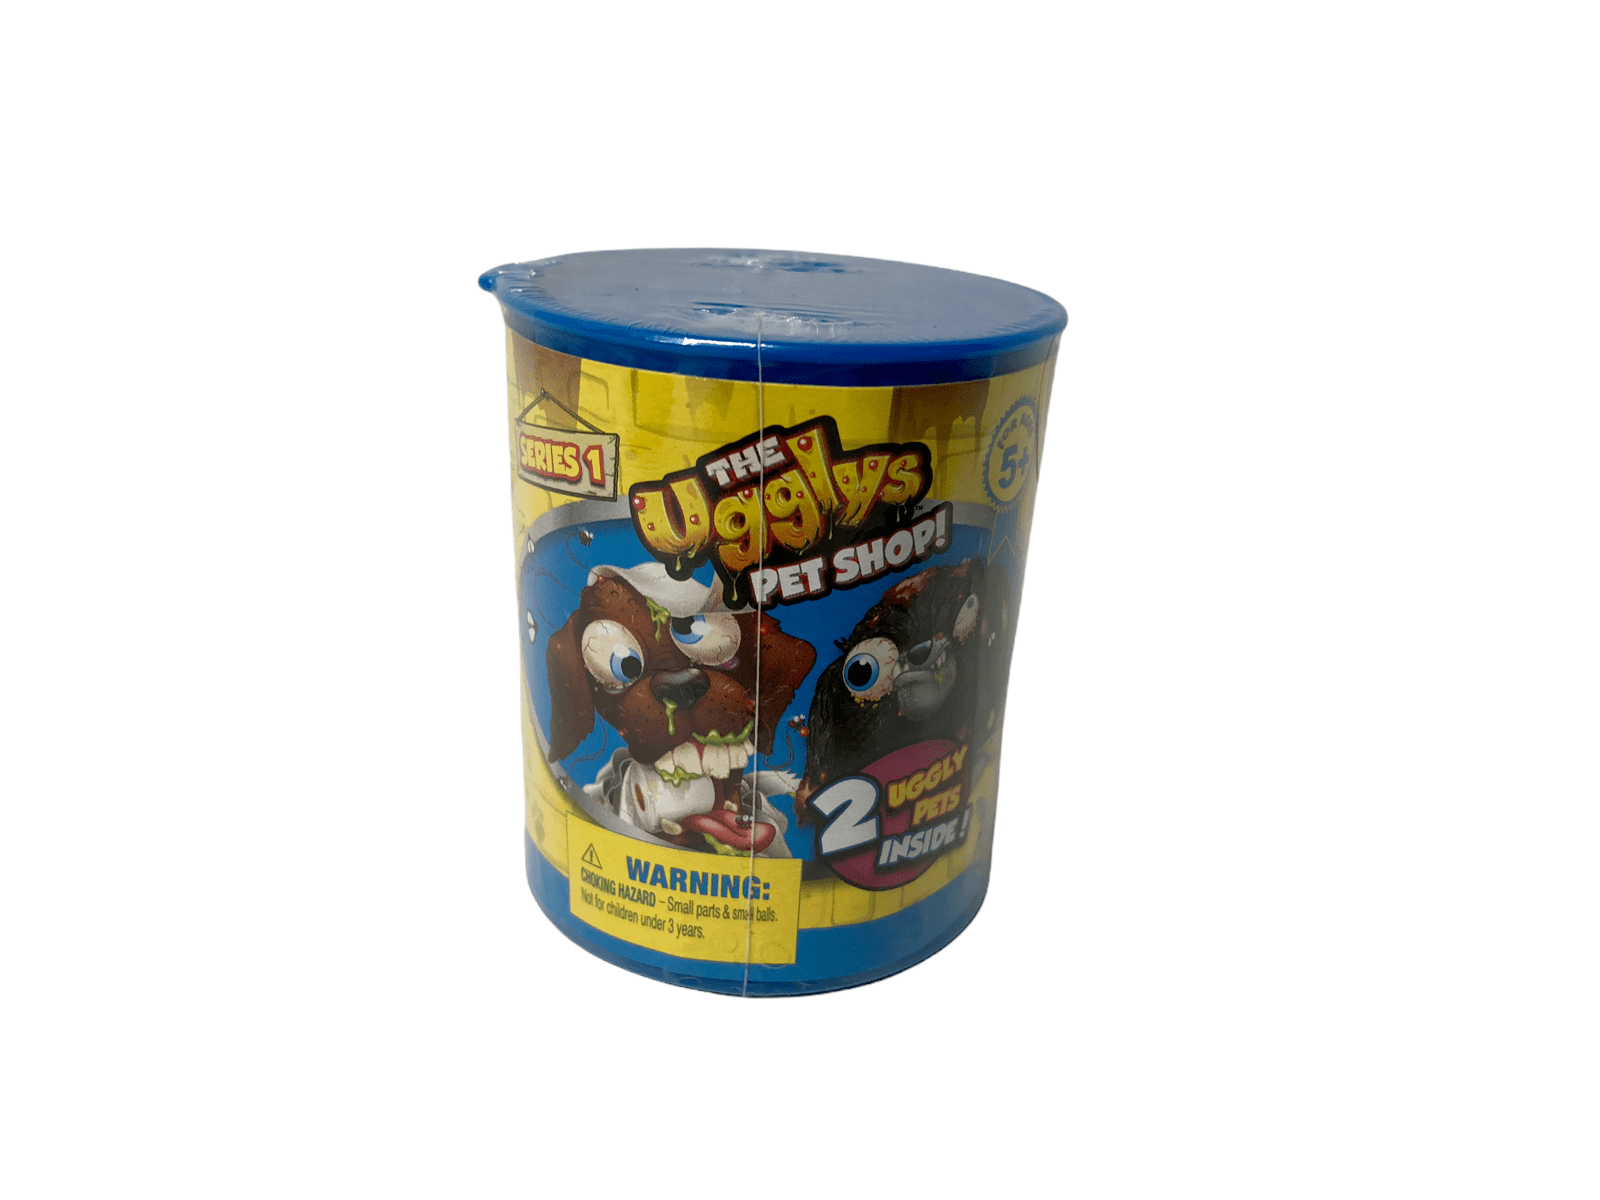 The Ugglys Pet Shop Gross Mutt Figurines Cans Includes 3 From Series 1 for sale online